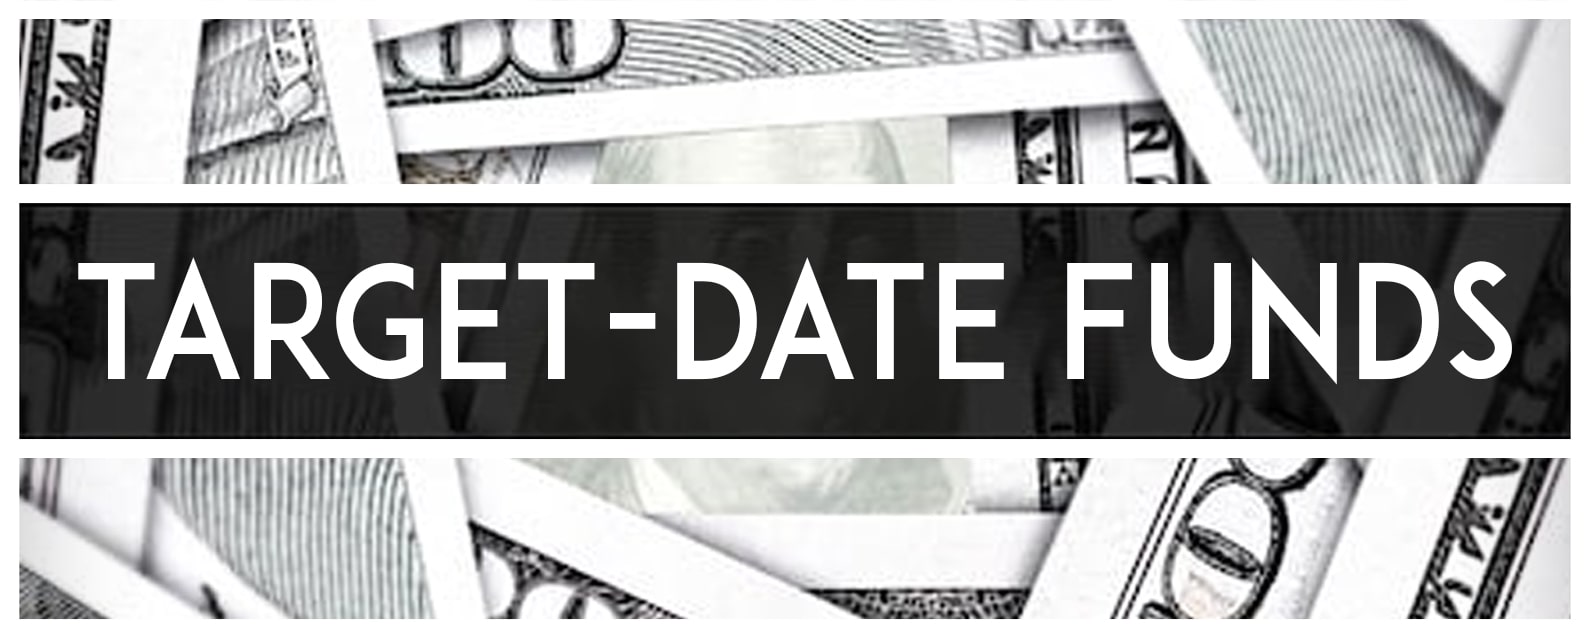 Target date funds